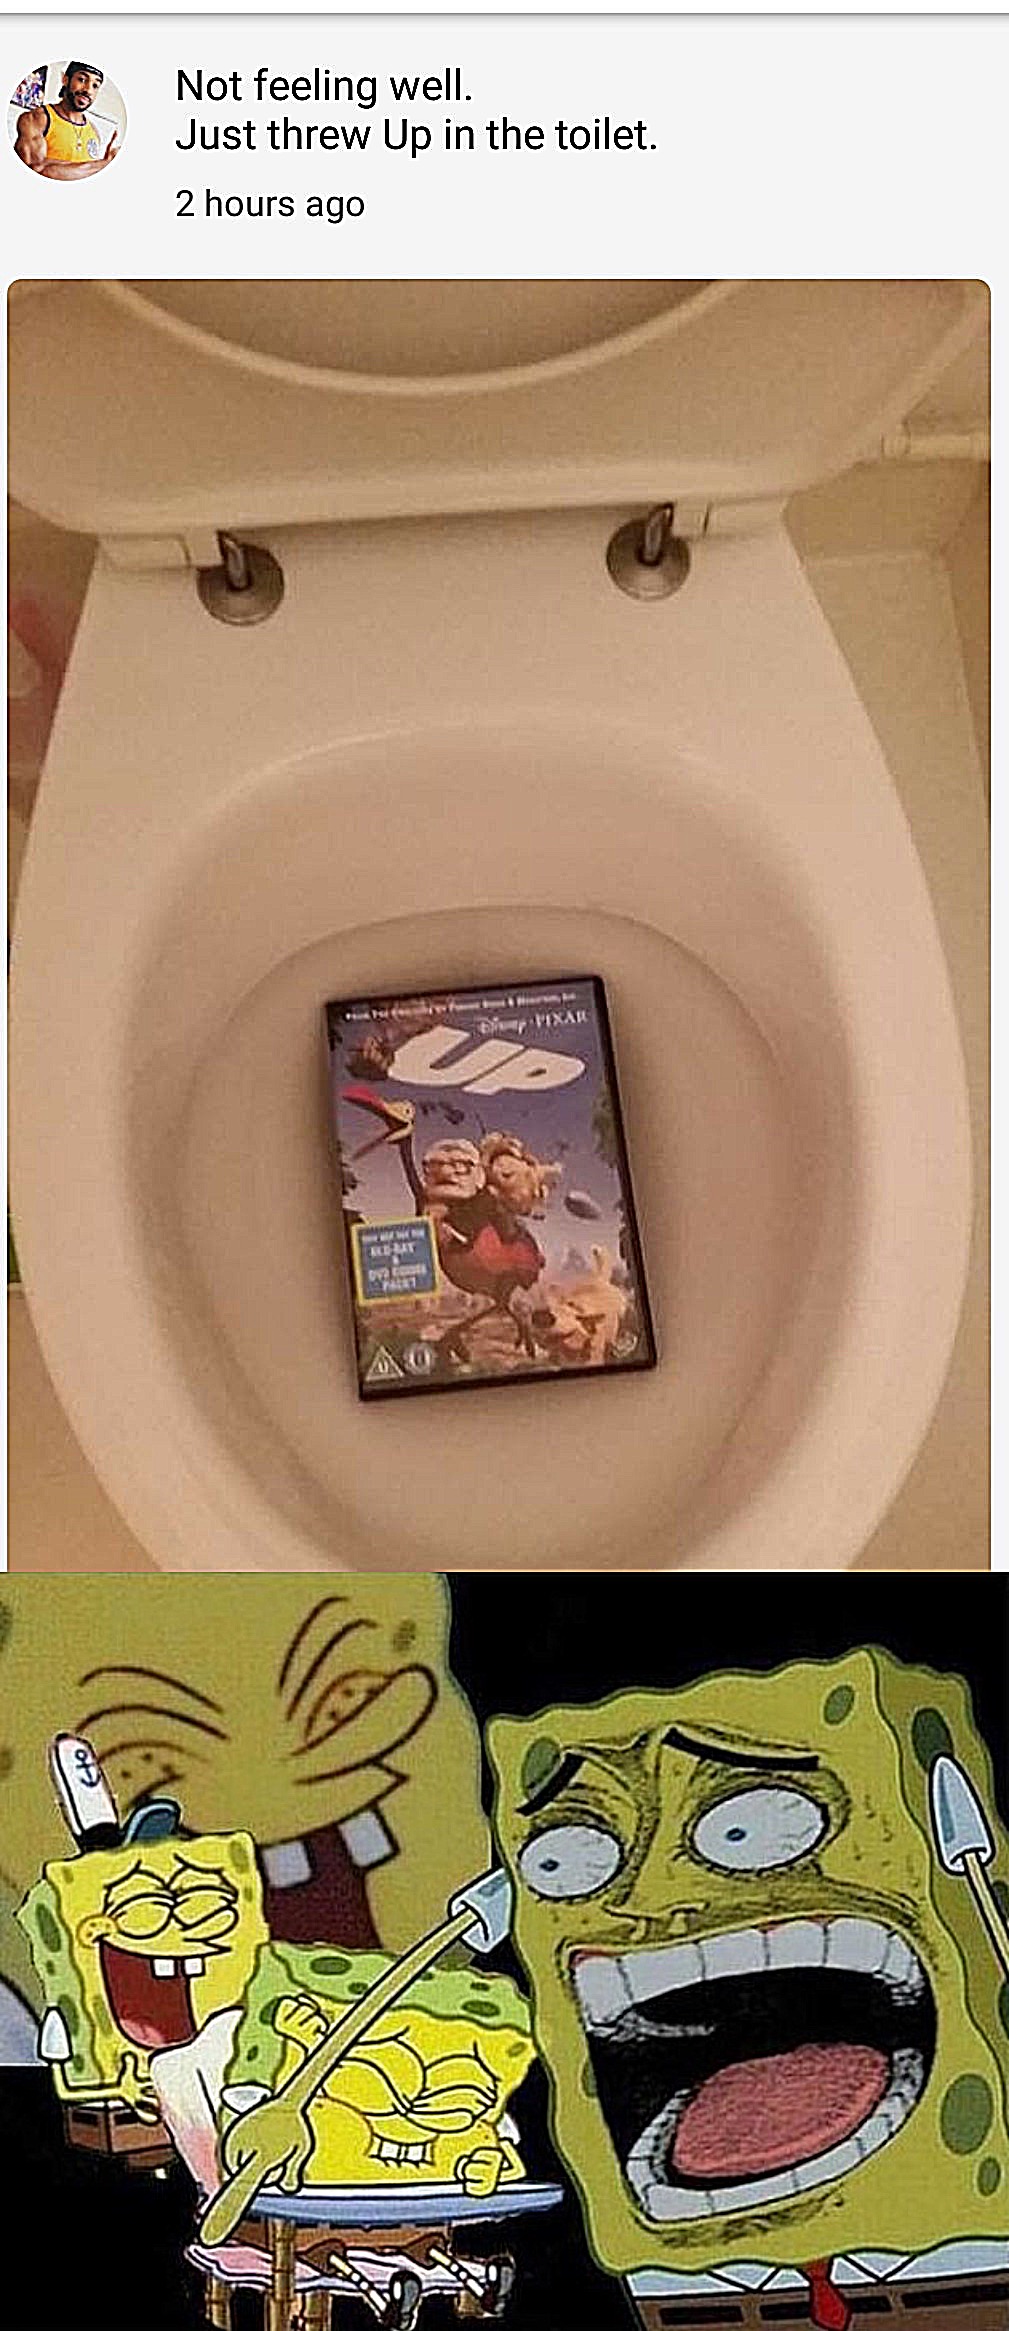 Threw UP in the toilet | image tagged in spongebob laughing hysterically,memes,funny,funny memes,dank memes,up | made w/ Imgflip meme maker